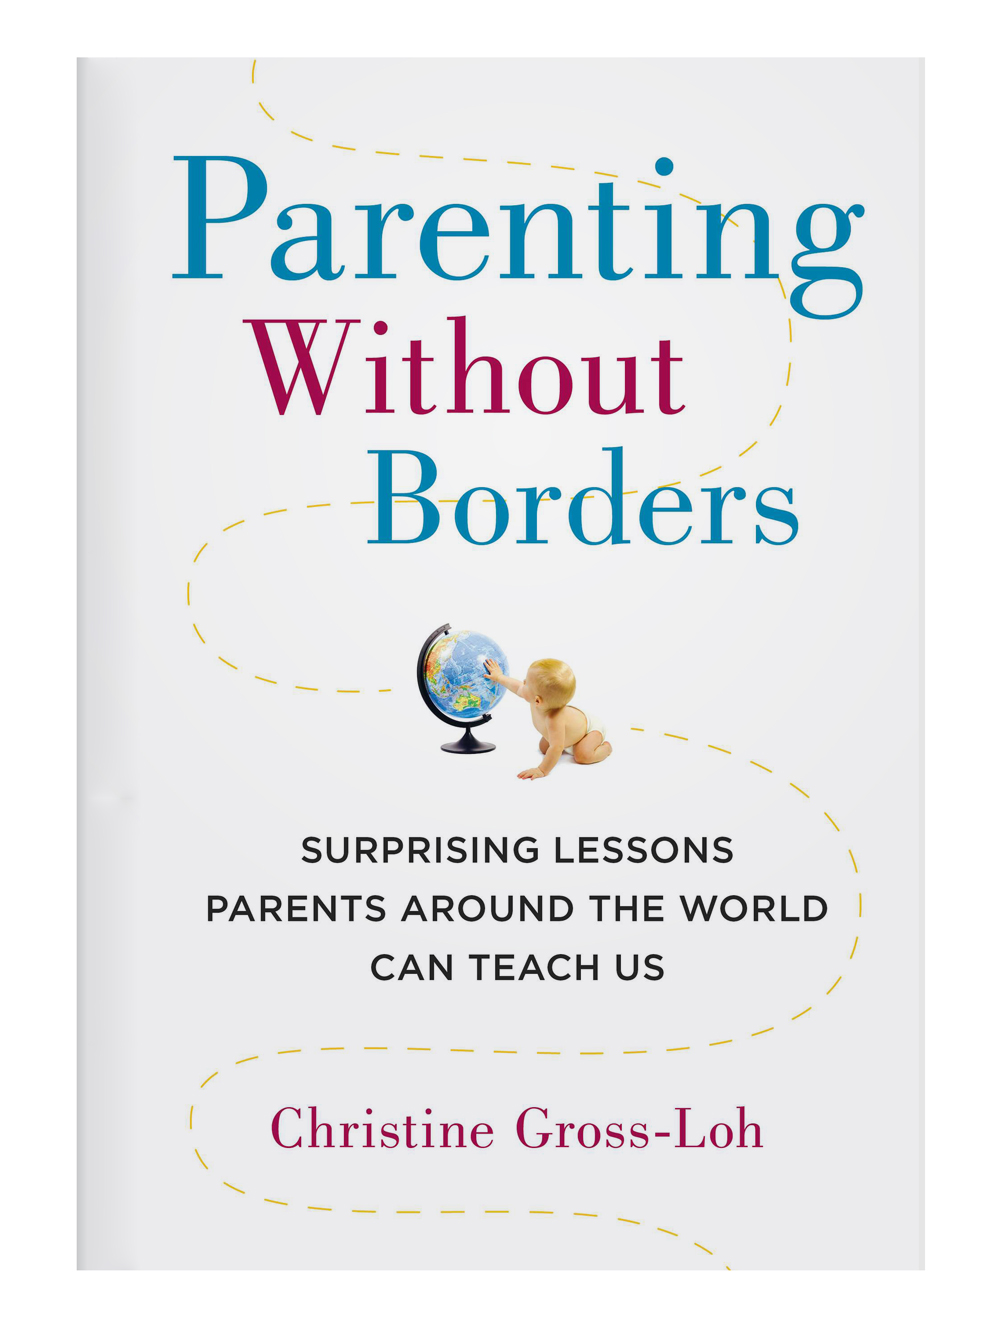 Parenting Without Borders by Christine Gross-Loh